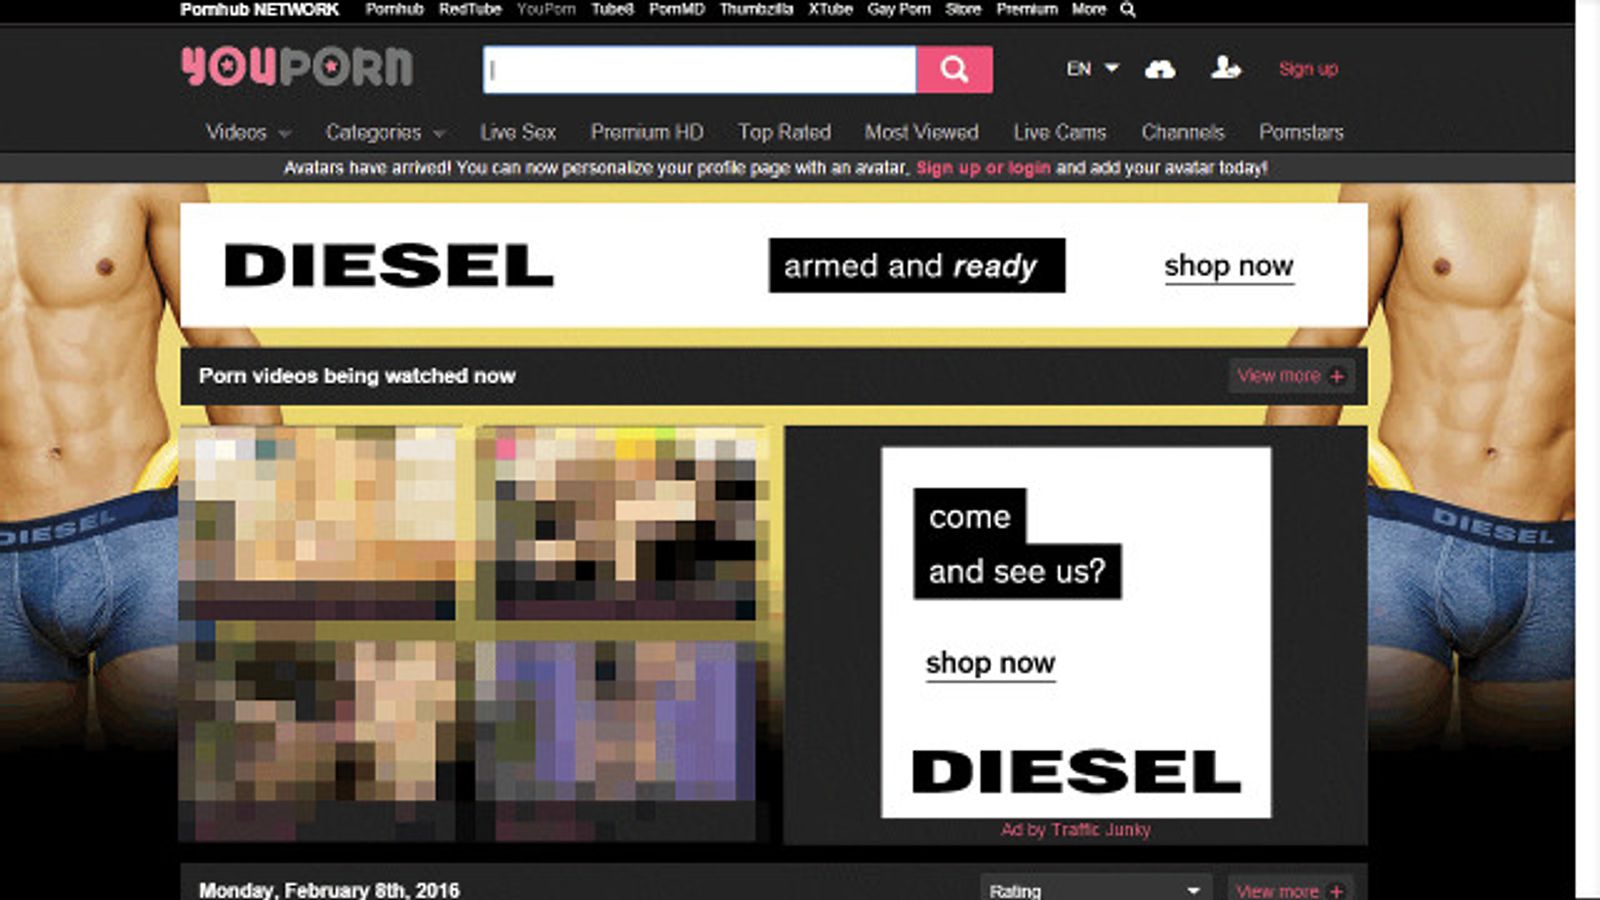 Pornhub Raises Stakes With Diesel Ad Campaign